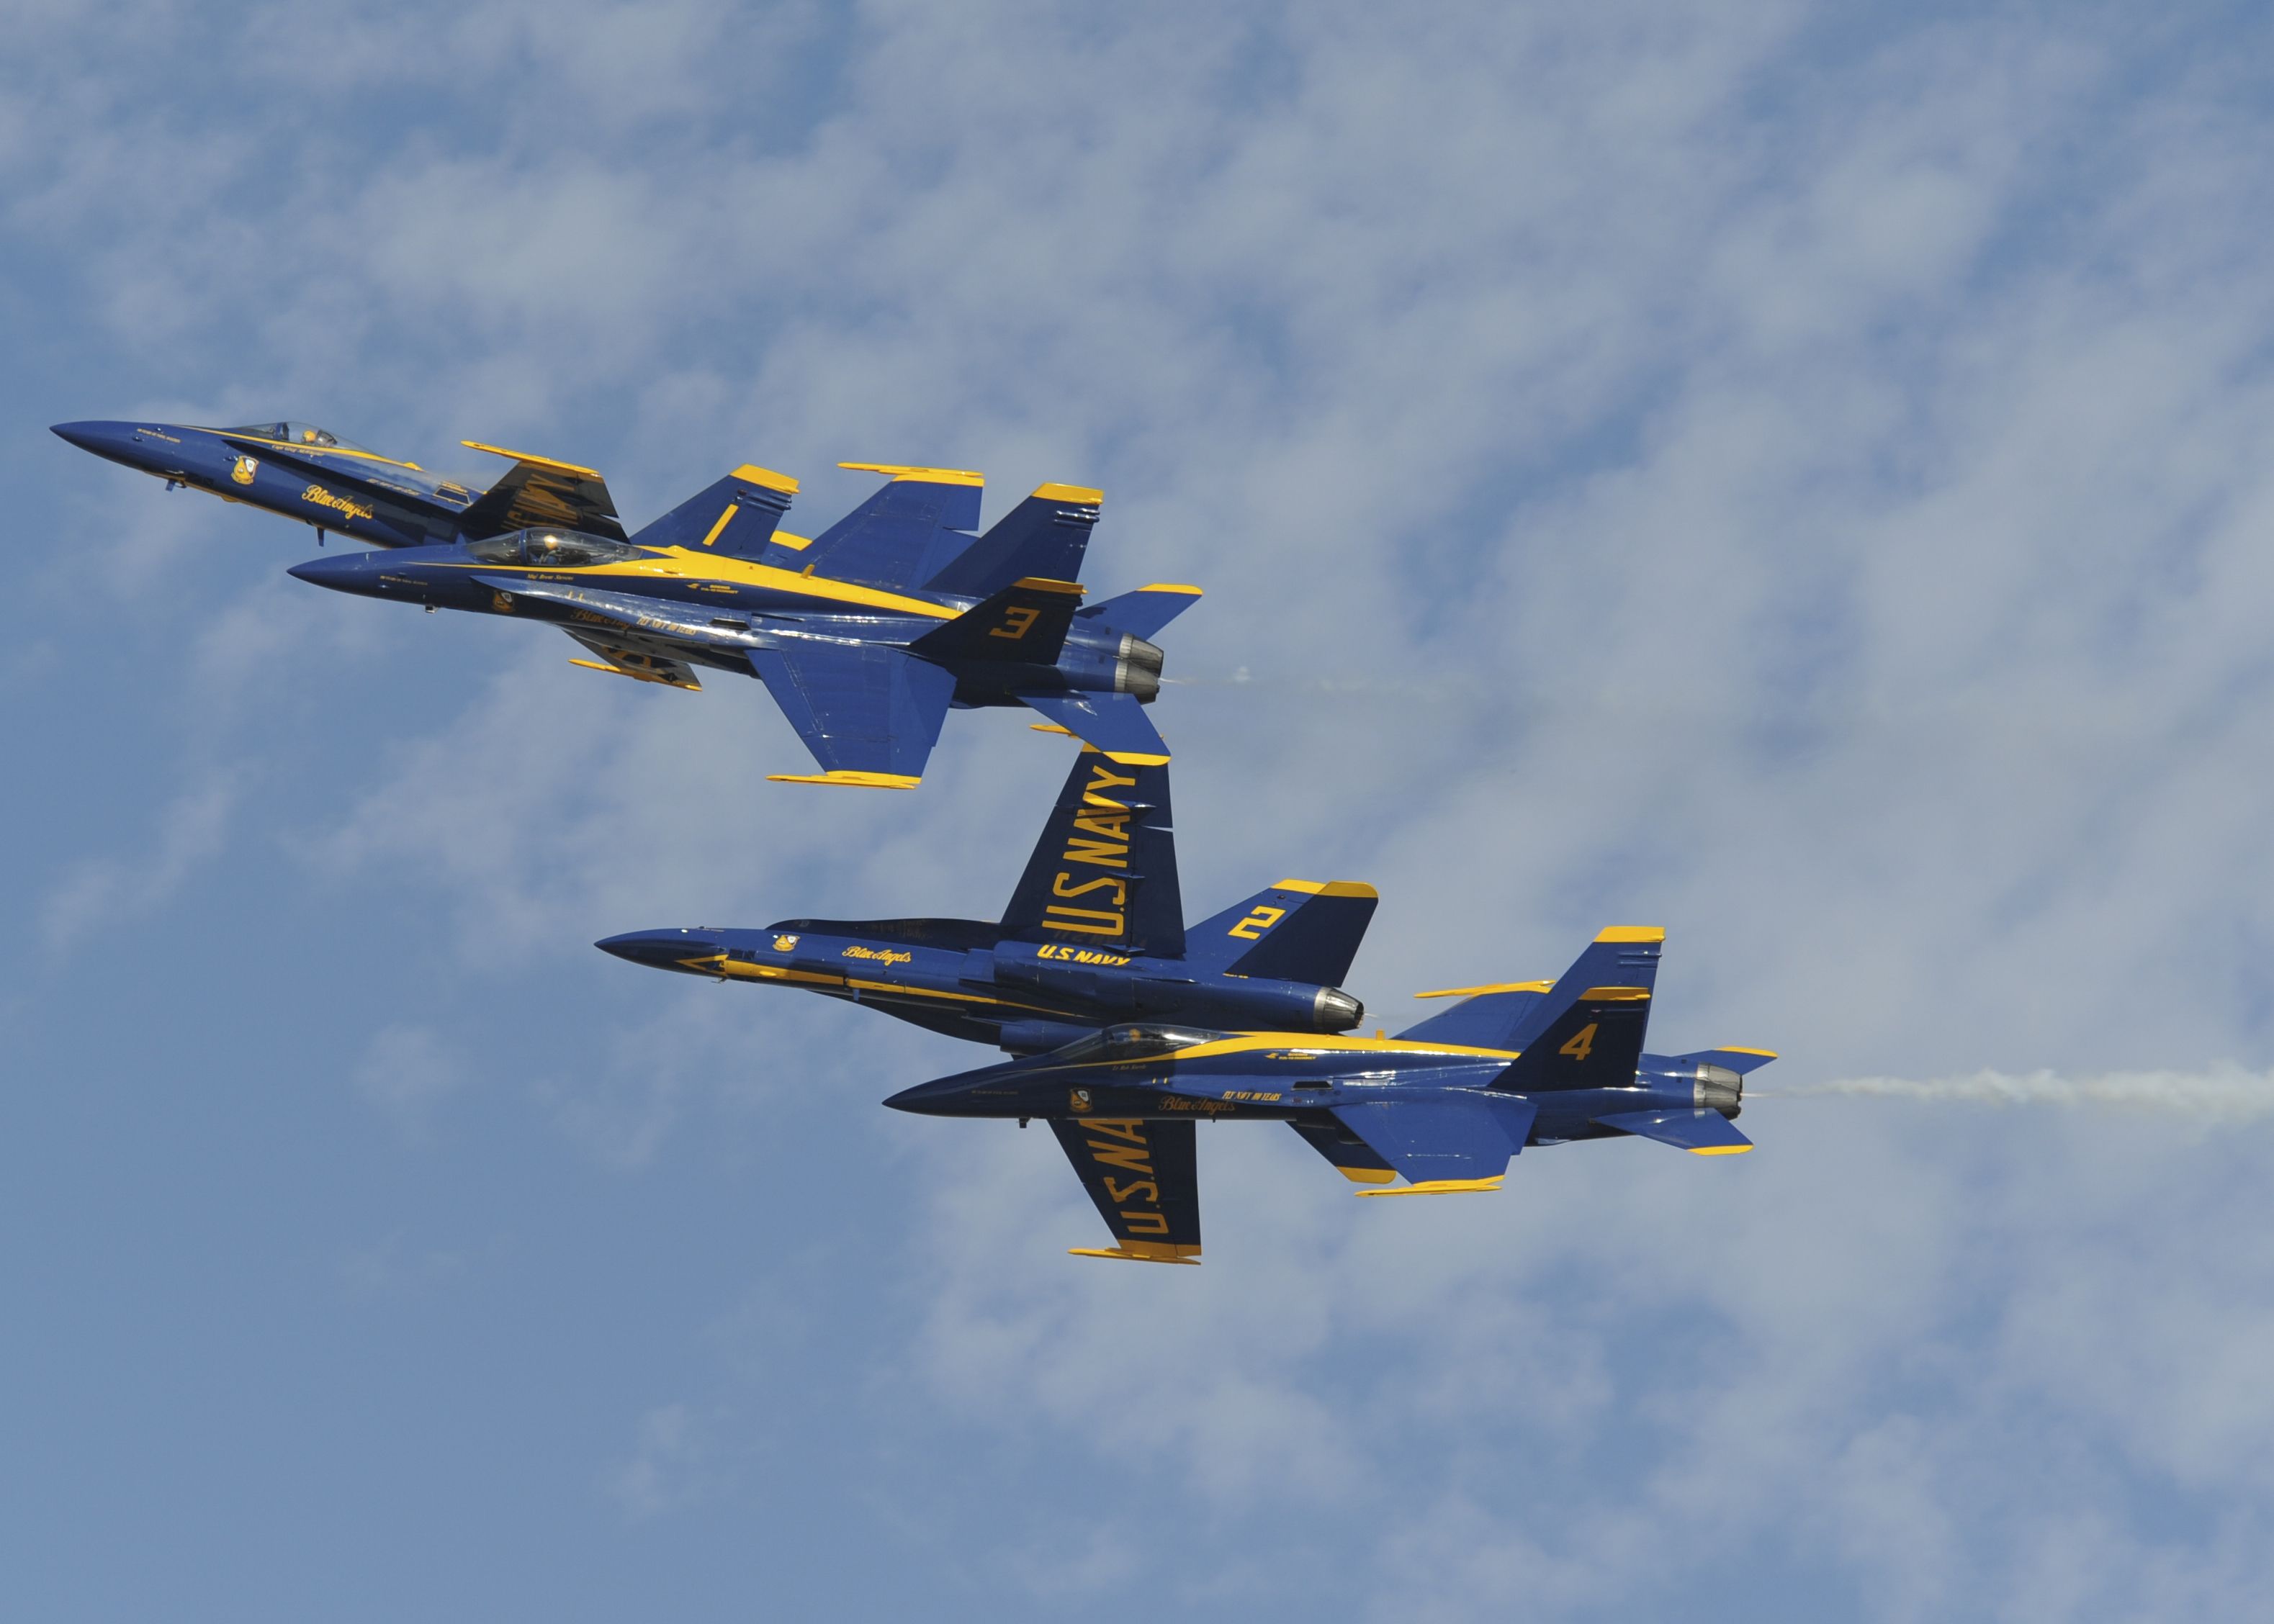 military, air show, aircraft, airplane, blue angels, jet, mcdonnell douglas f/a 18 hornet, navy, vehicle, military aircraft